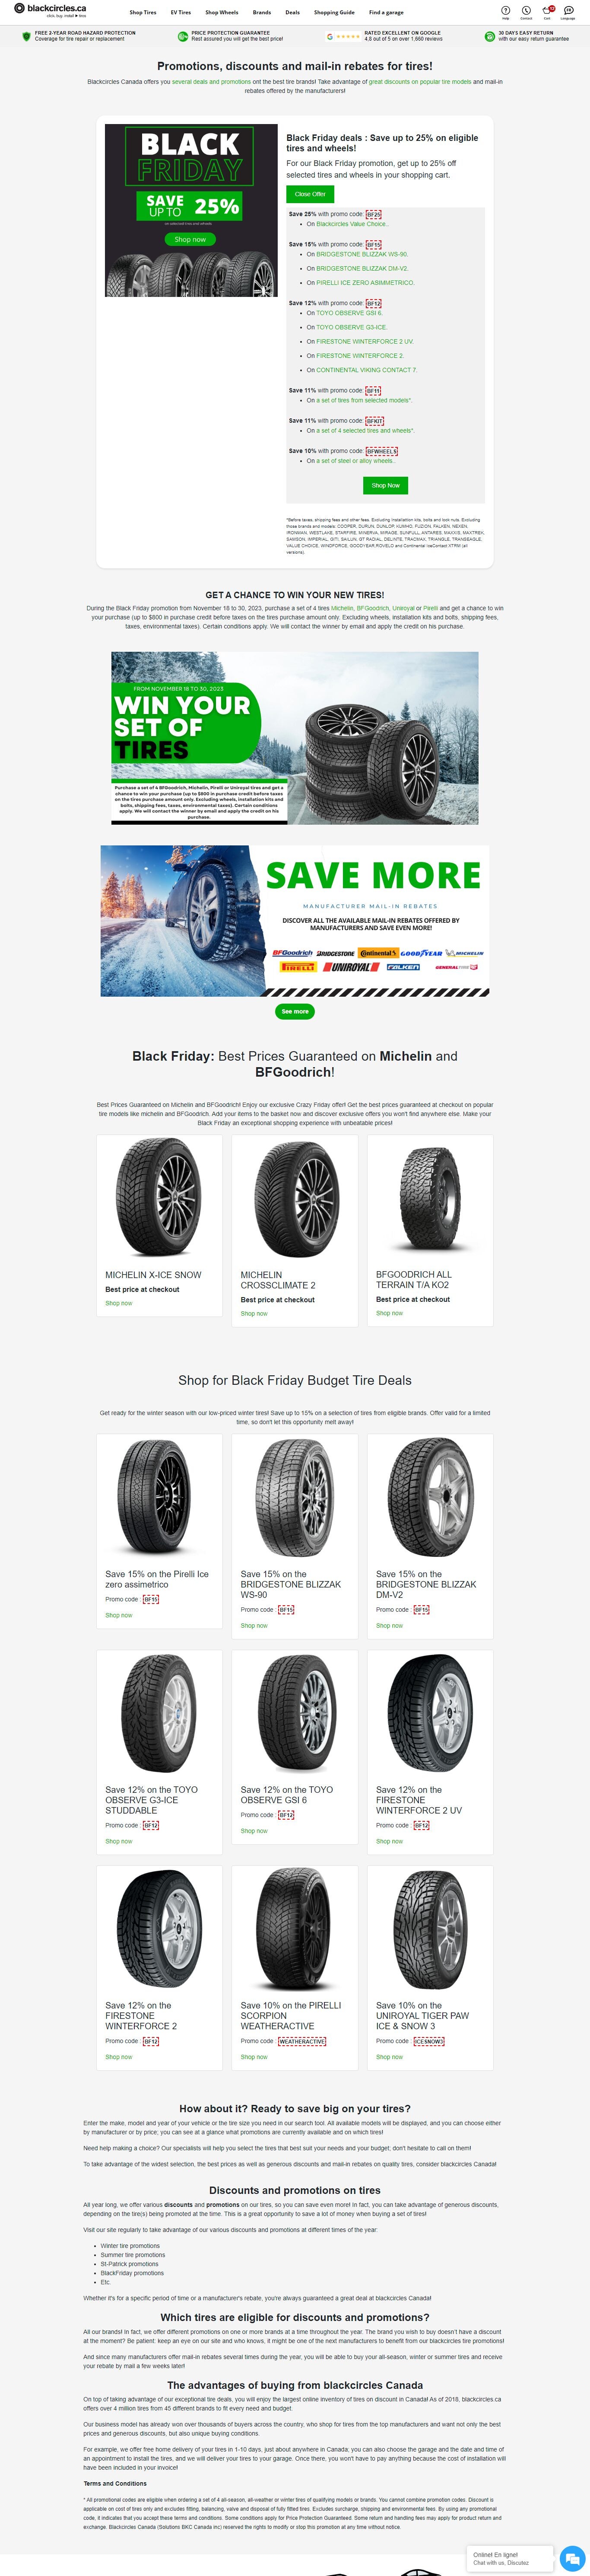 Blackcircles] [Black Friday] 10% to 25% Off on tires and wheels -  RedFlagDeals.com Forums